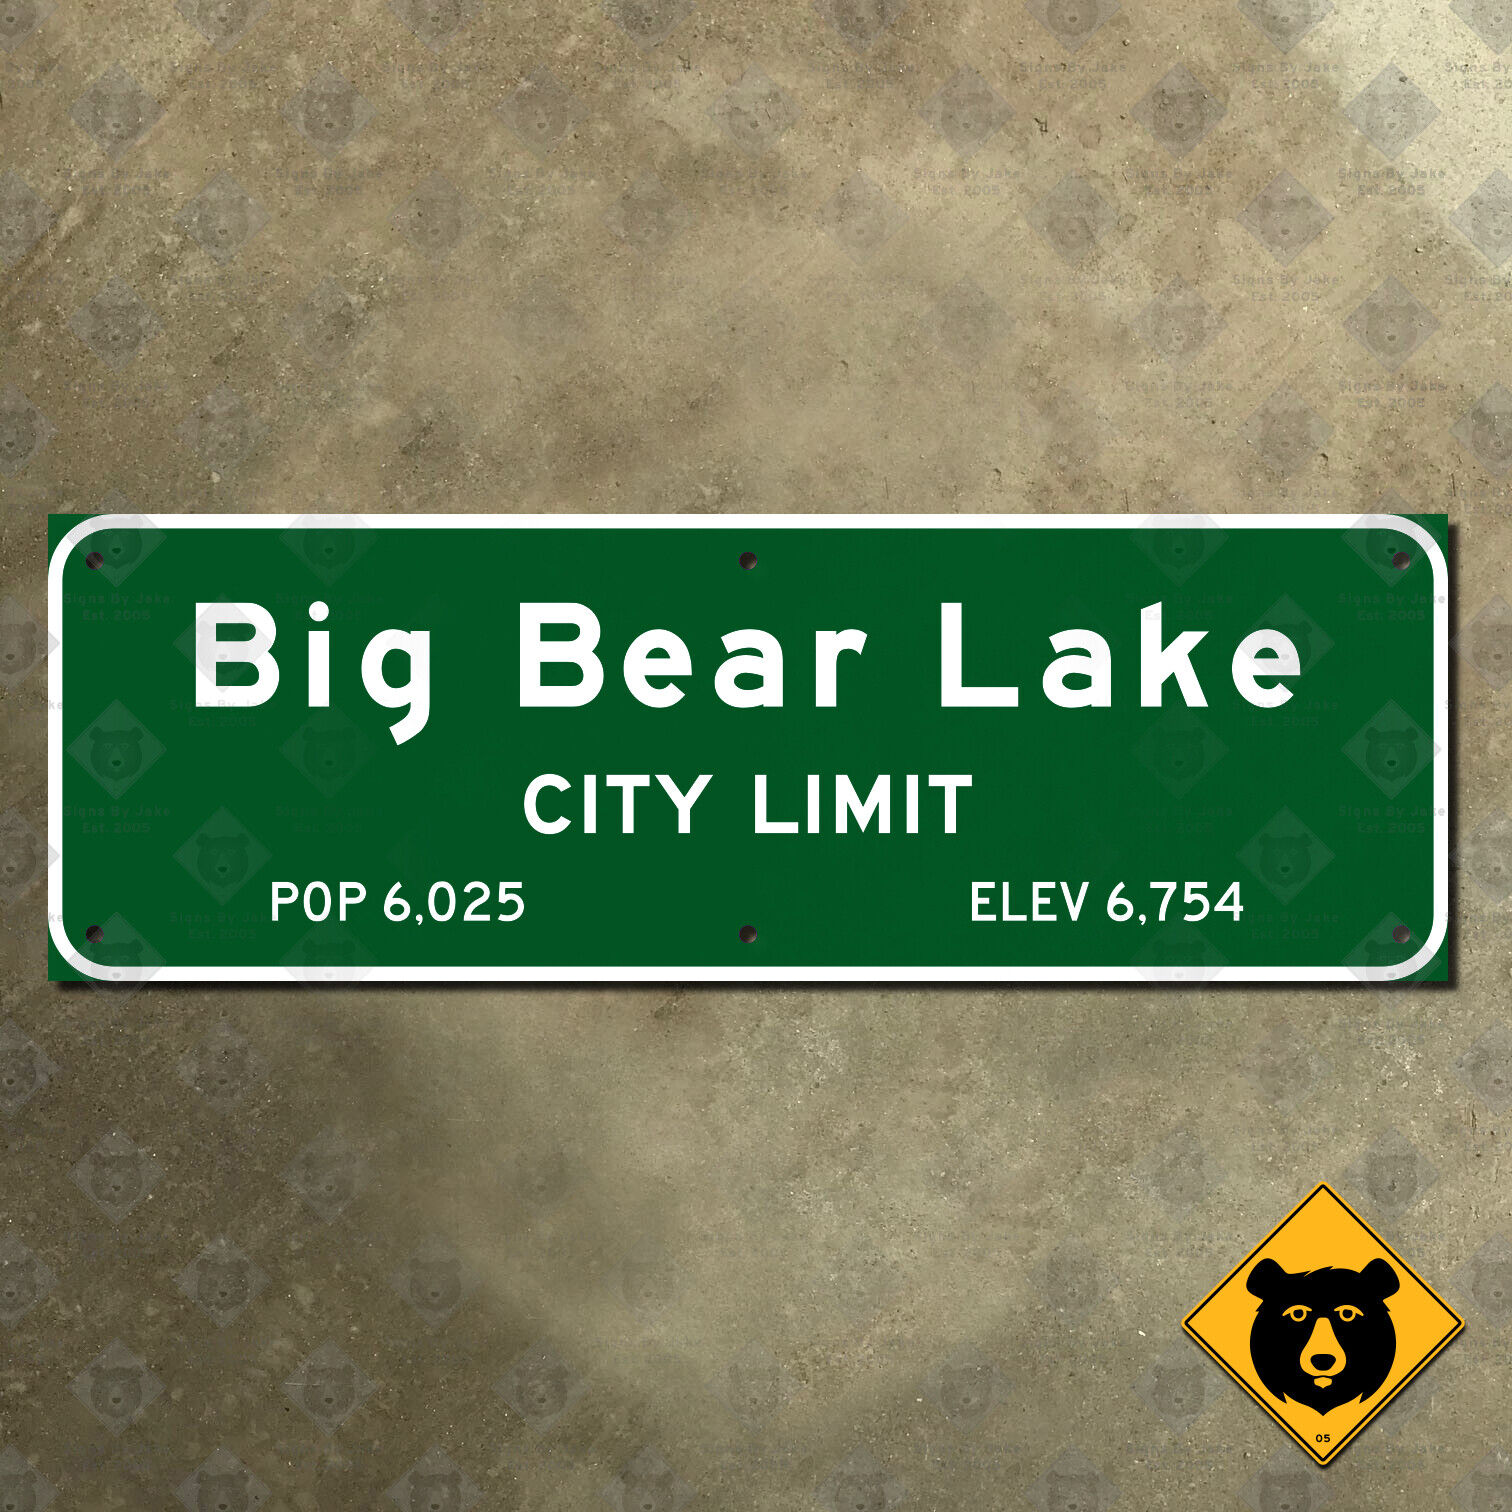 Big Bear Lake California city limit welcome highway road sign 1959 21x7